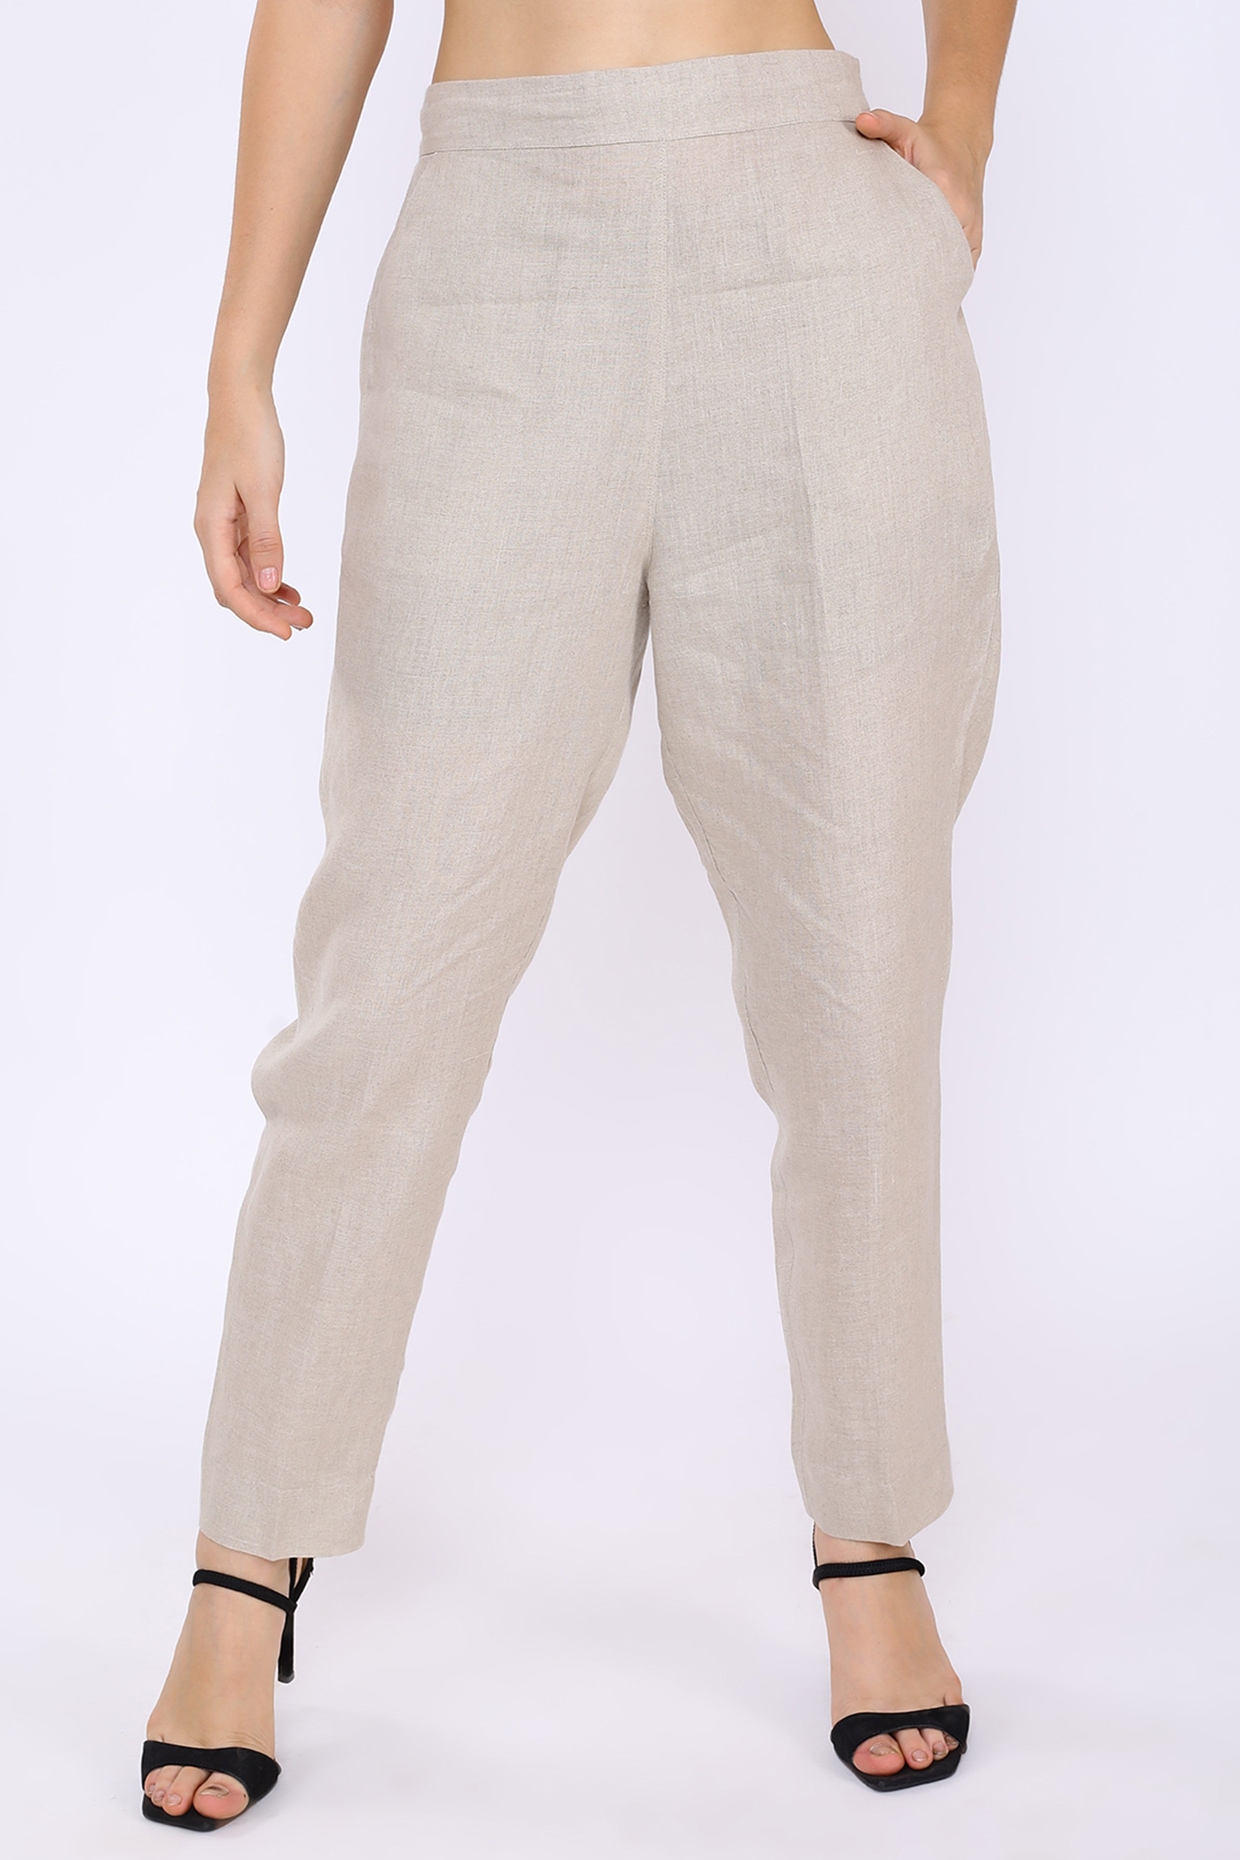 Buy DS FABRICS Cotton Casual Straight Fit Stretchable Pencil Pant for  WomenGirls XLBeige at Amazonin